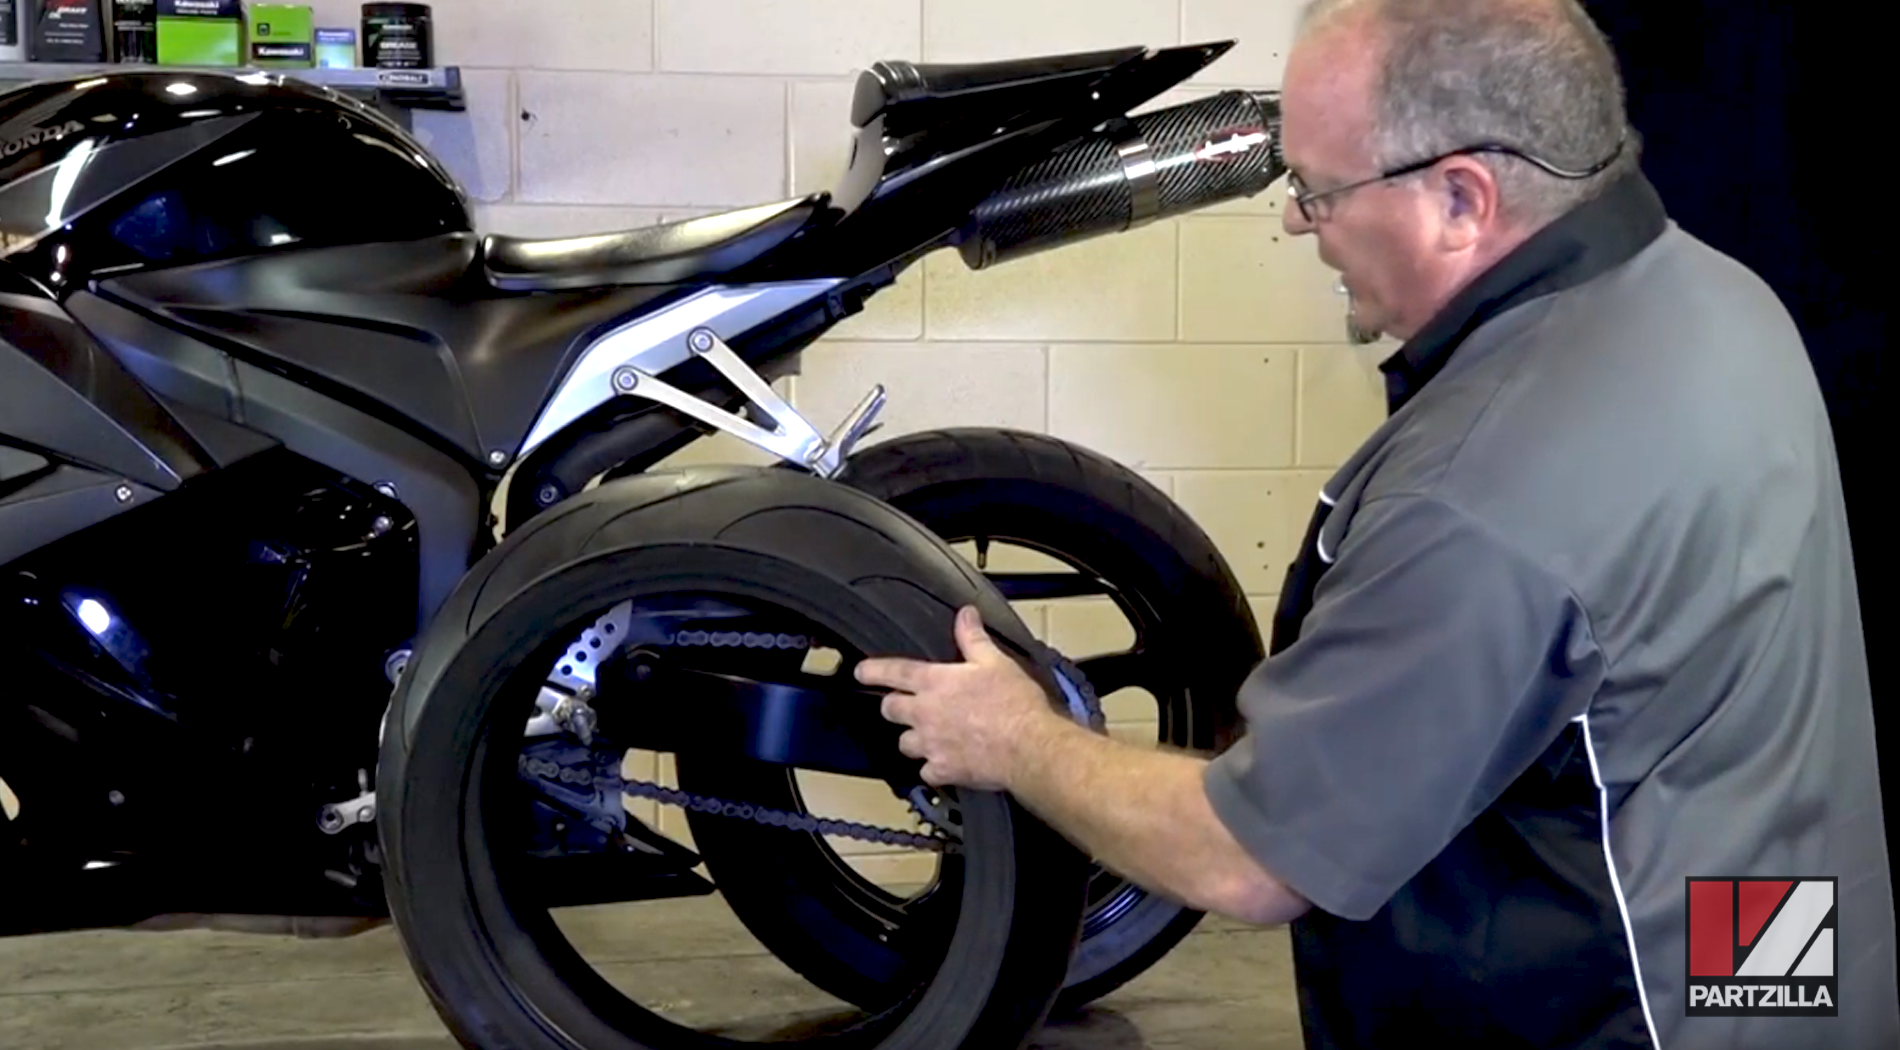 How to check motorcycle tread wear